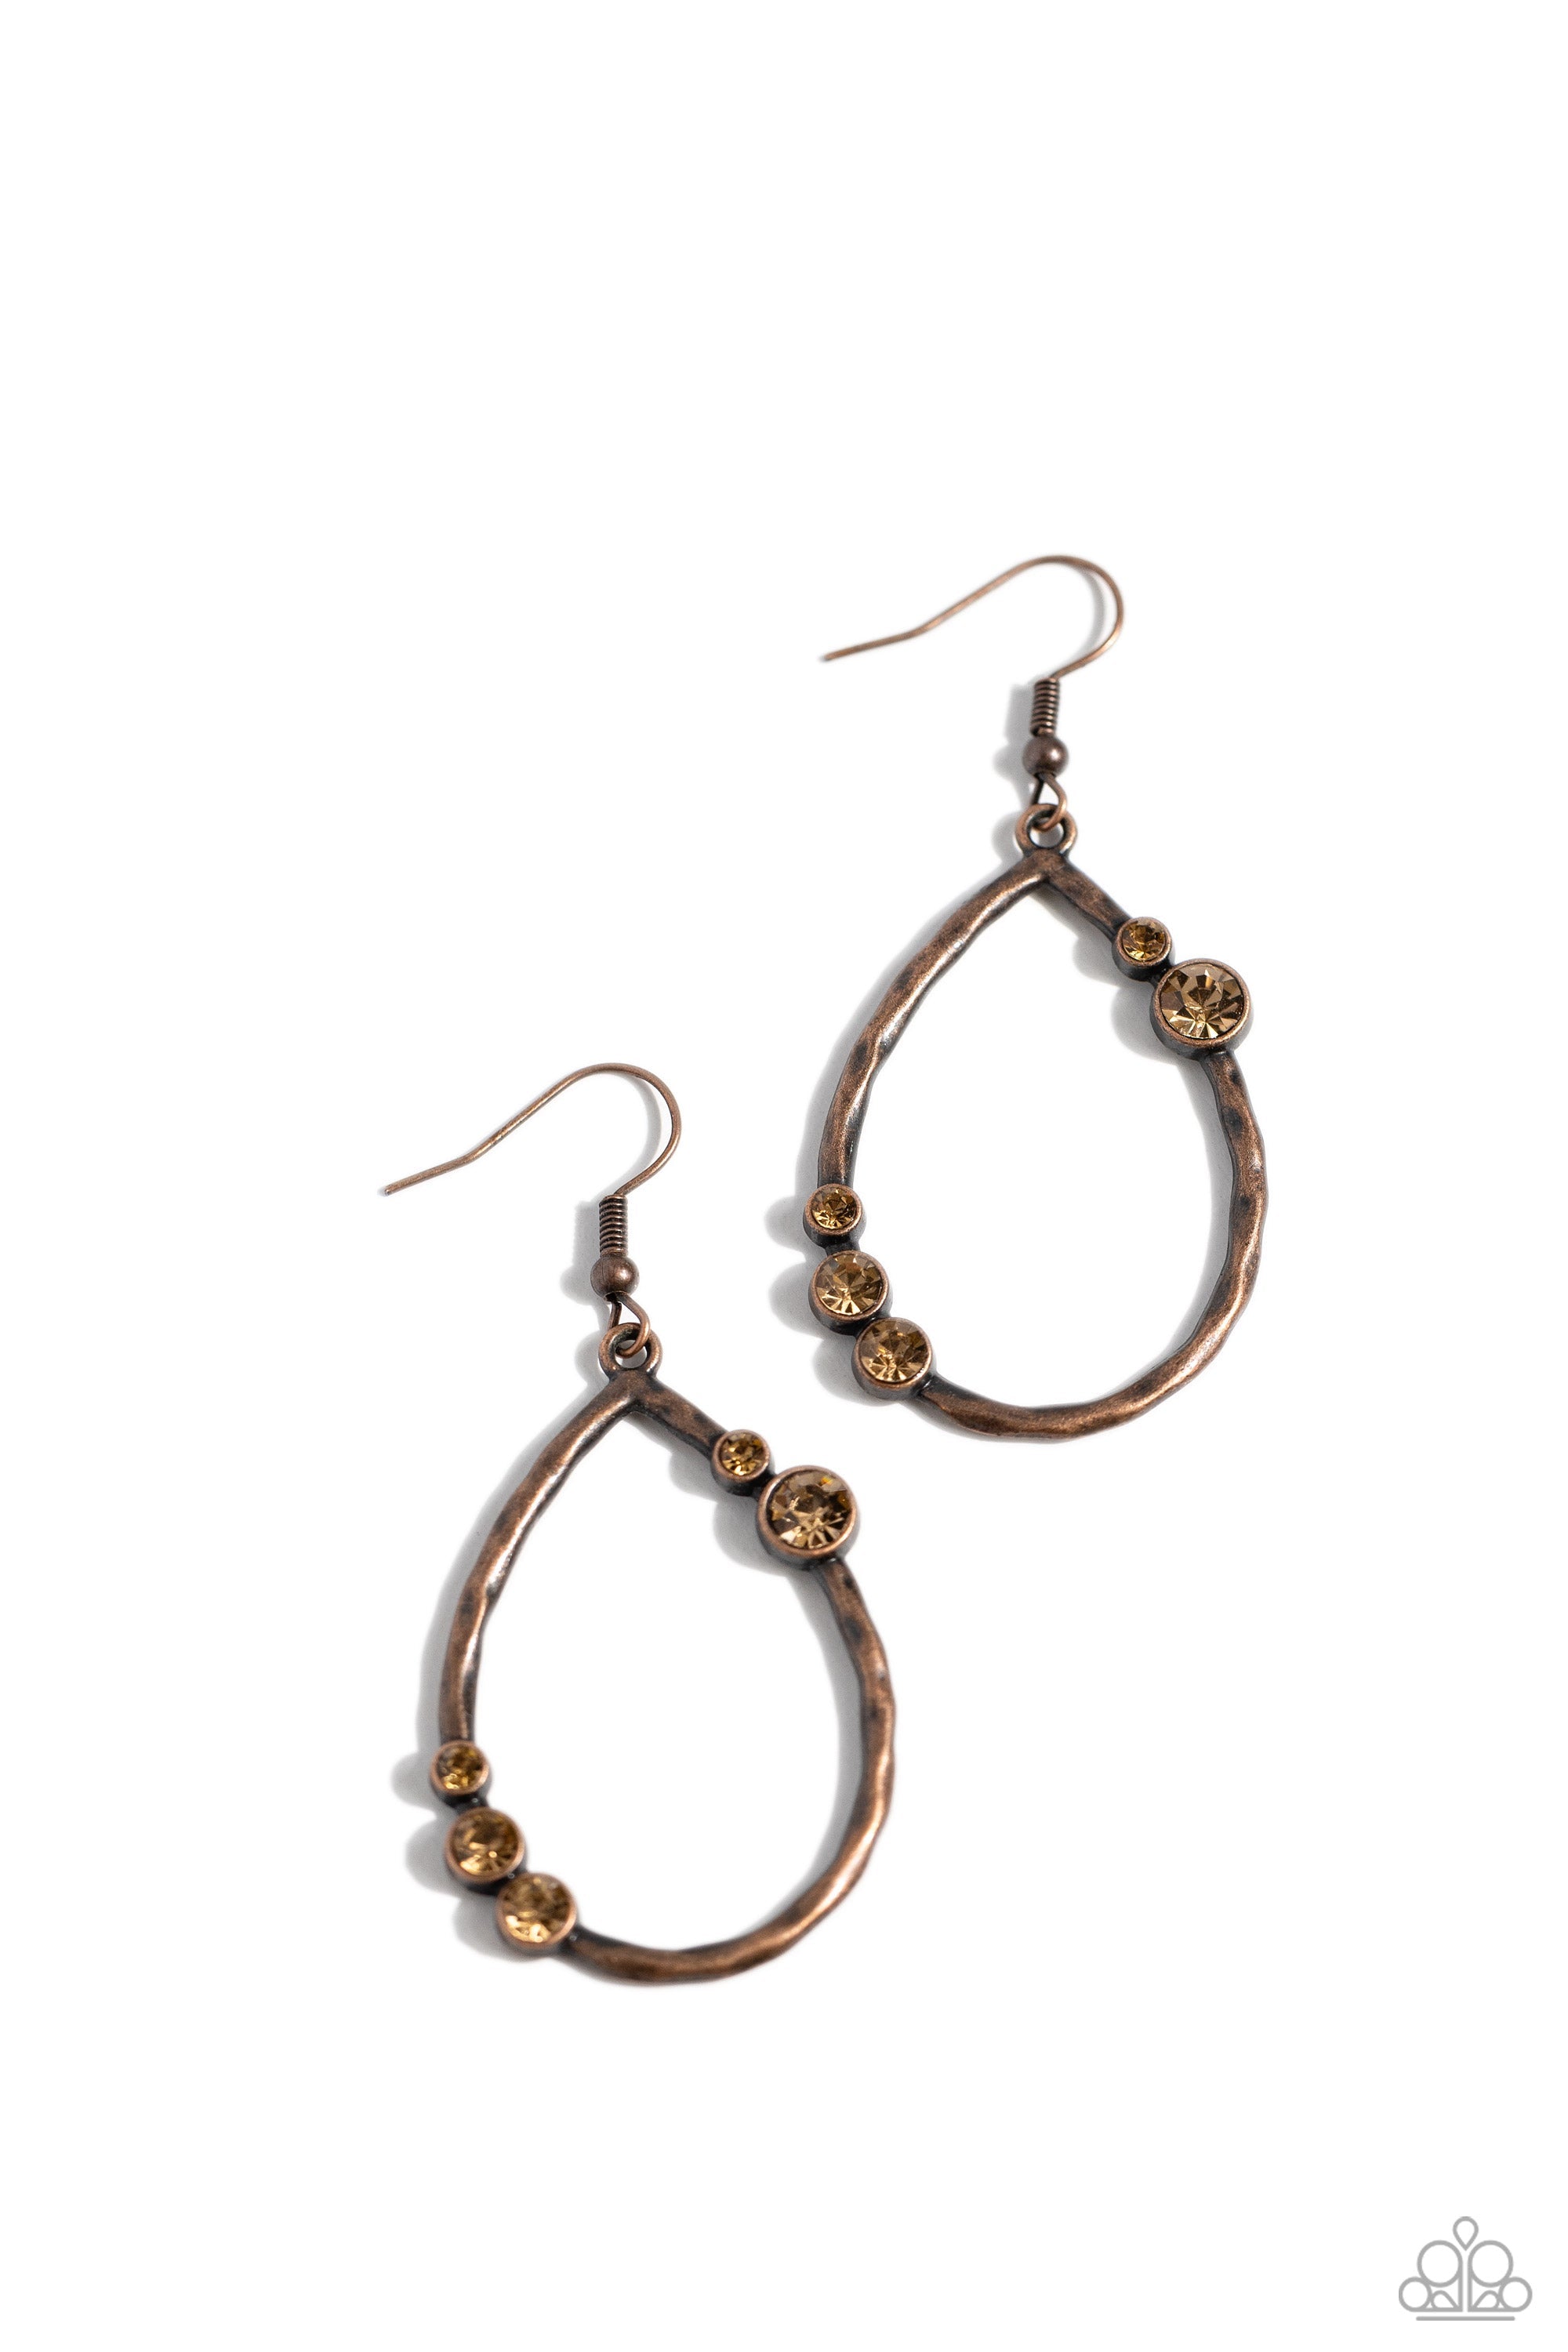 Shop Till You DROPLET Copper Earrings - Paparazzi Accessories- lightbox - CarasShop.com - $5 Jewelry by Cara Jewels